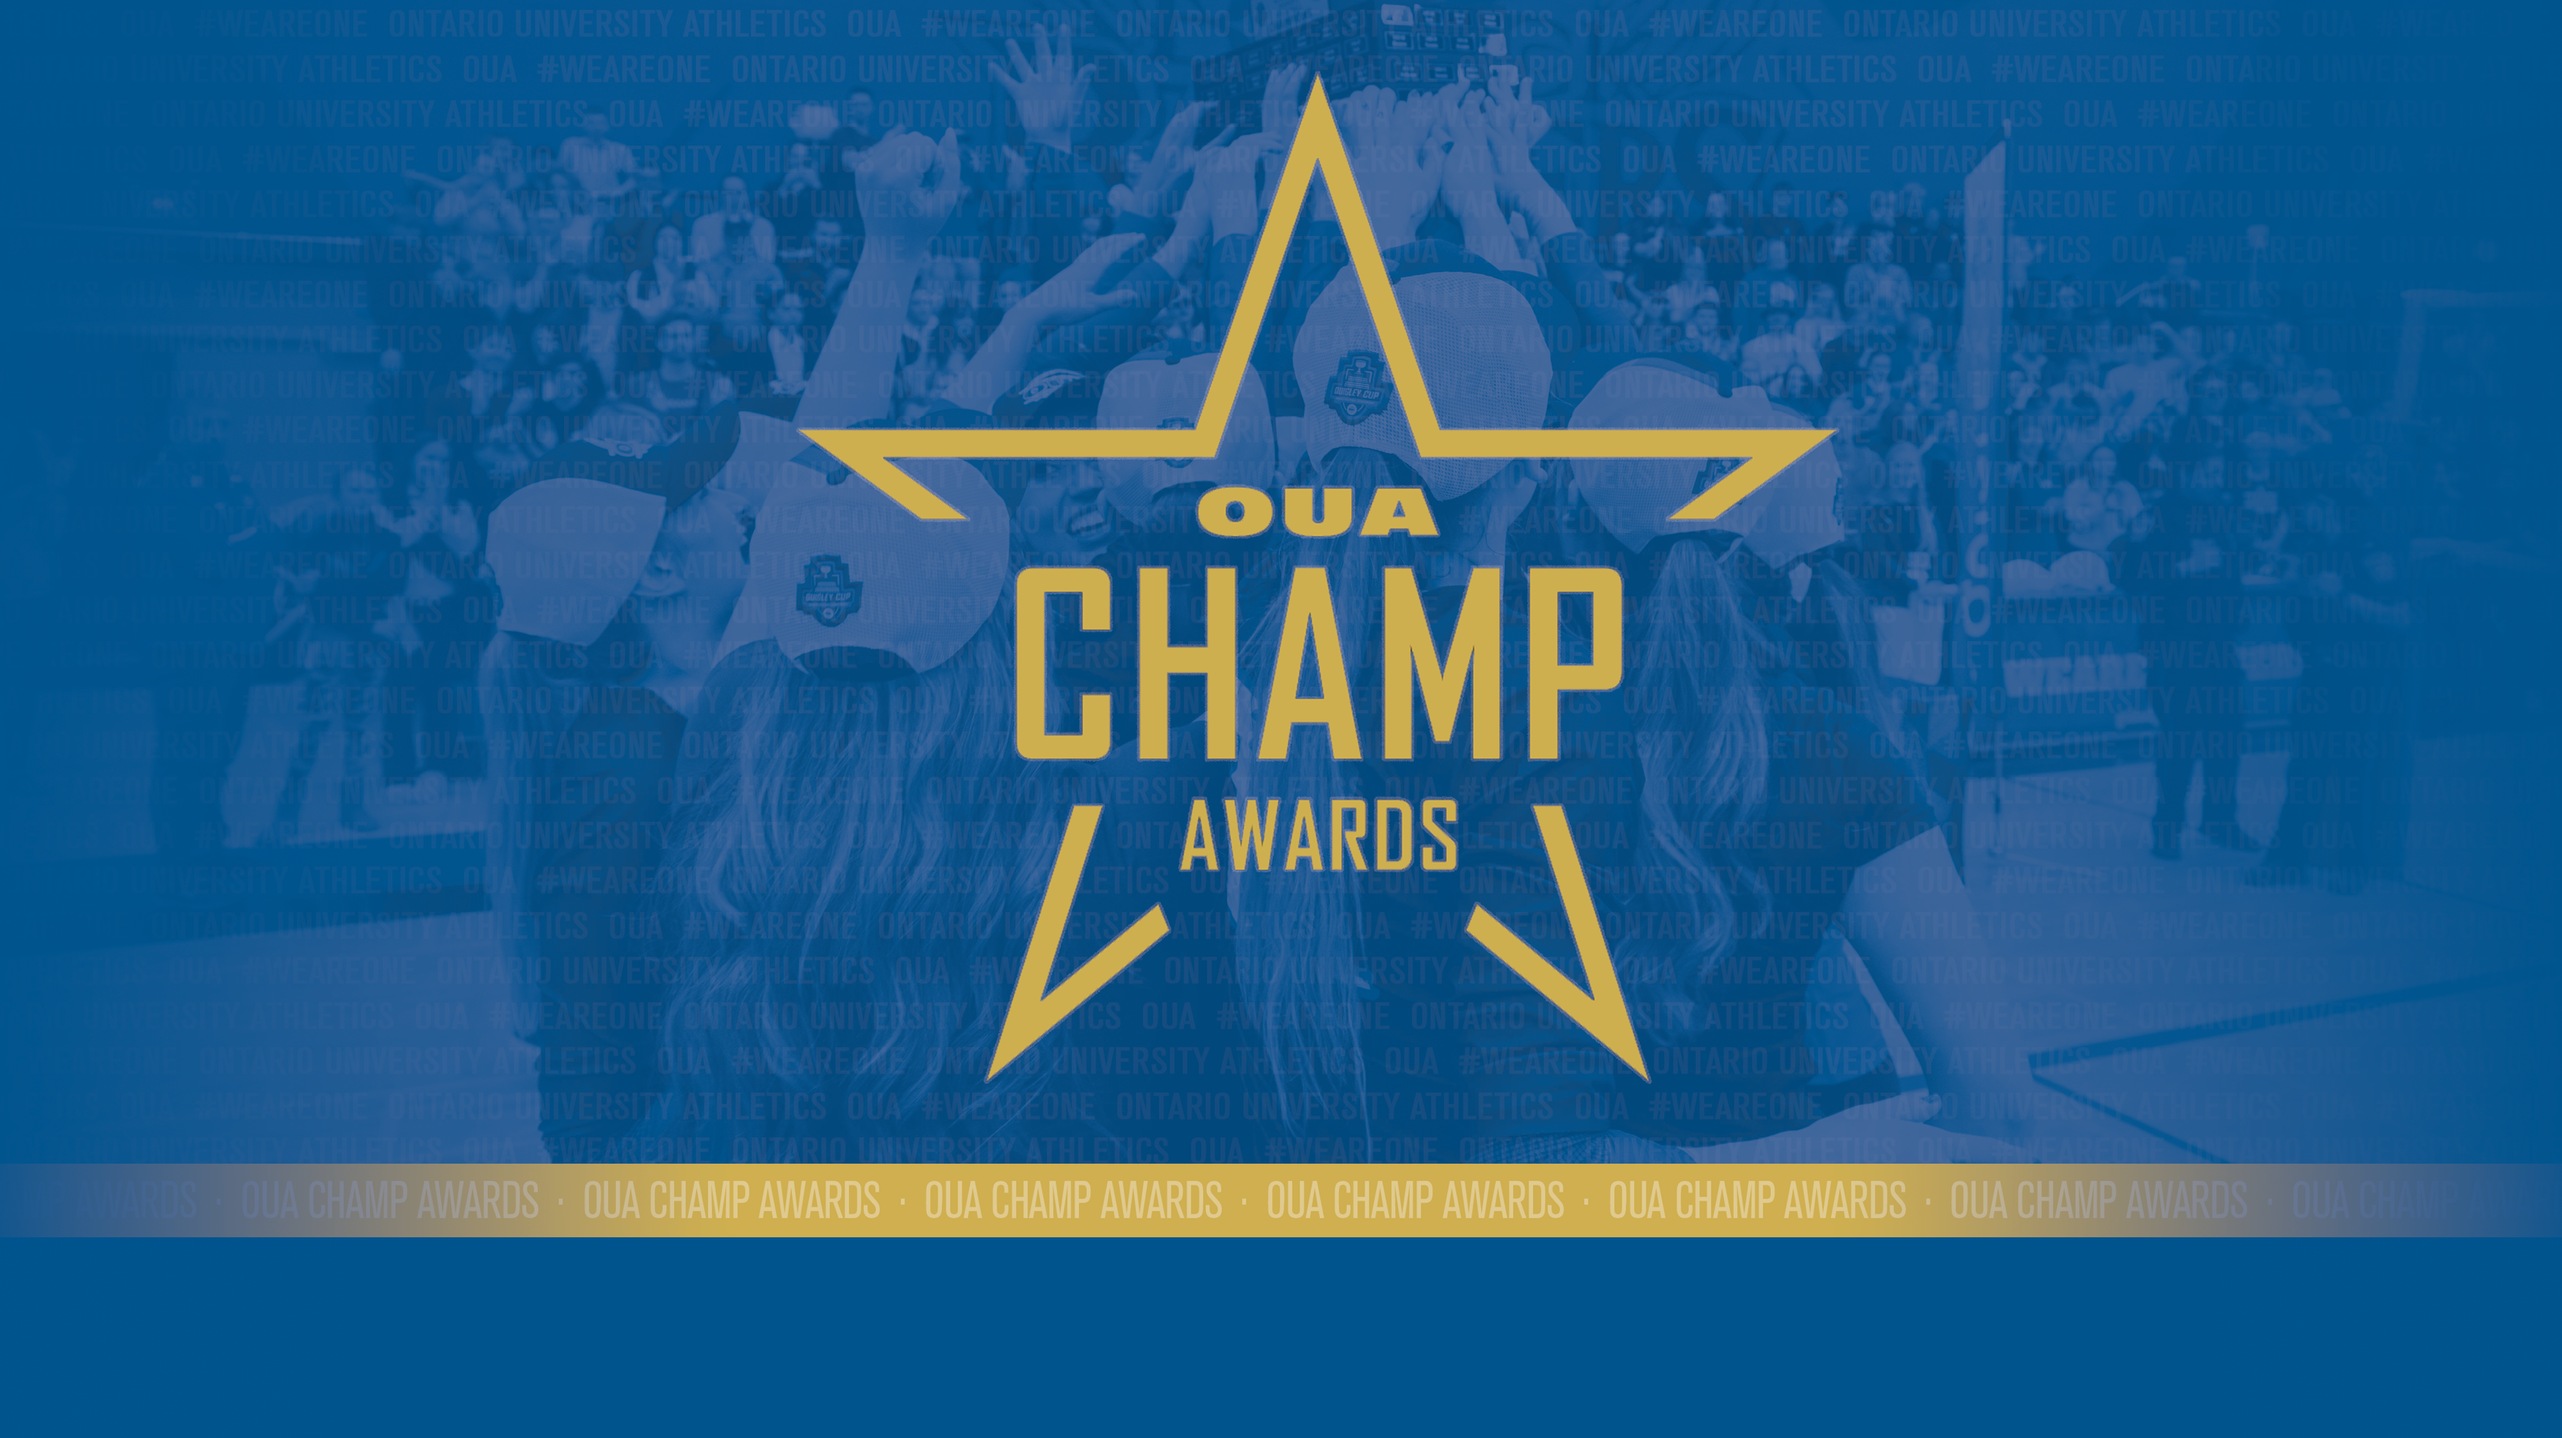 OUA CHAMP Awards logo in gold on a blue background with faded photo of women's volleyball team celebrating, as well as thin gold rectangle in the bottom third